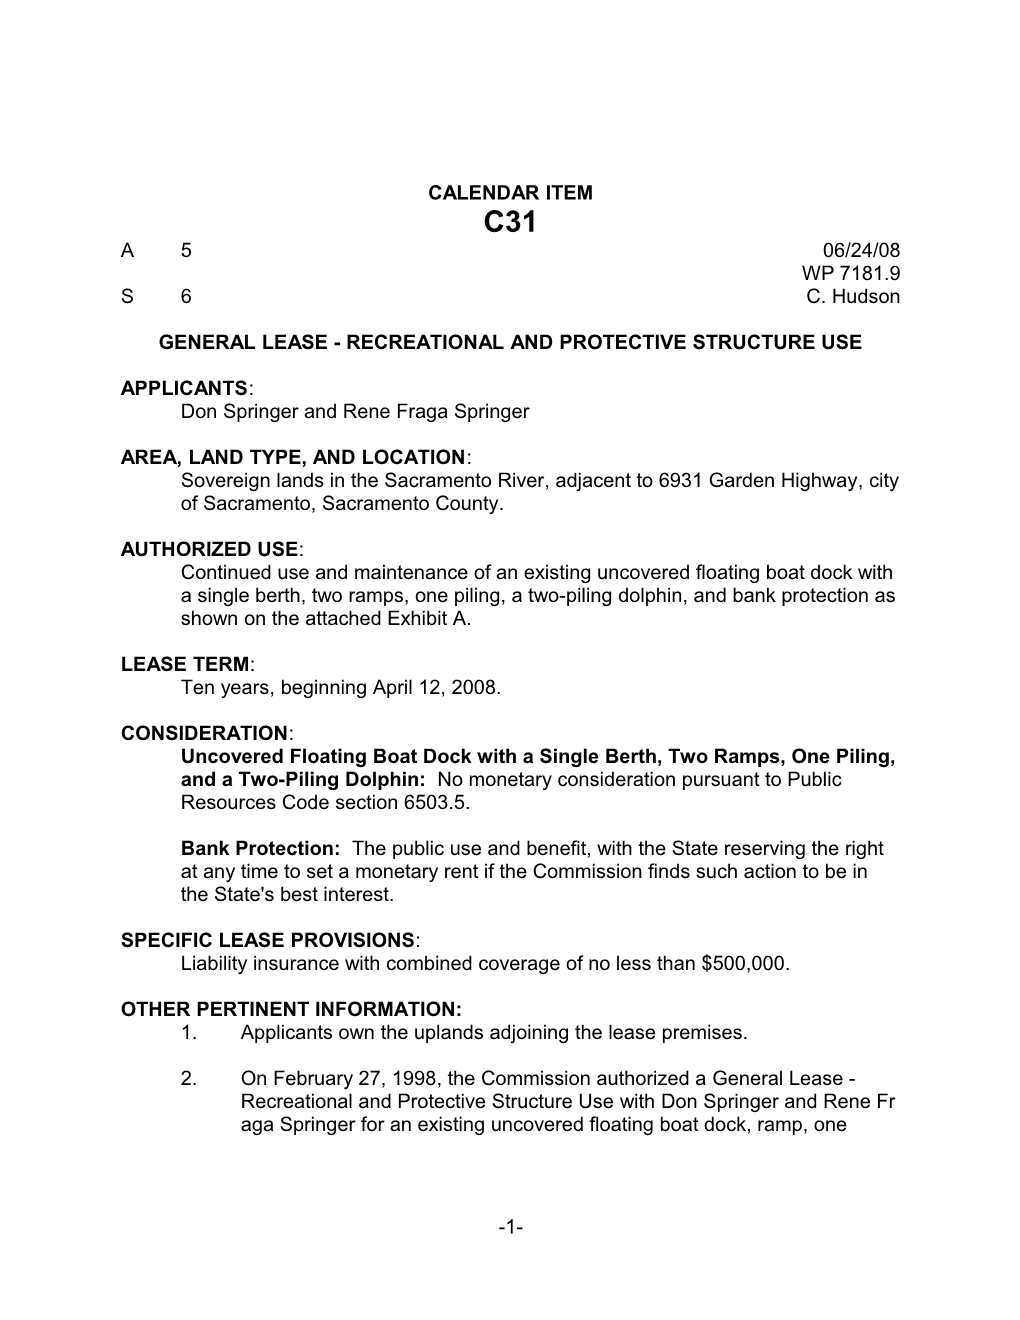 General Lease - Recreational and Protective Structure Use